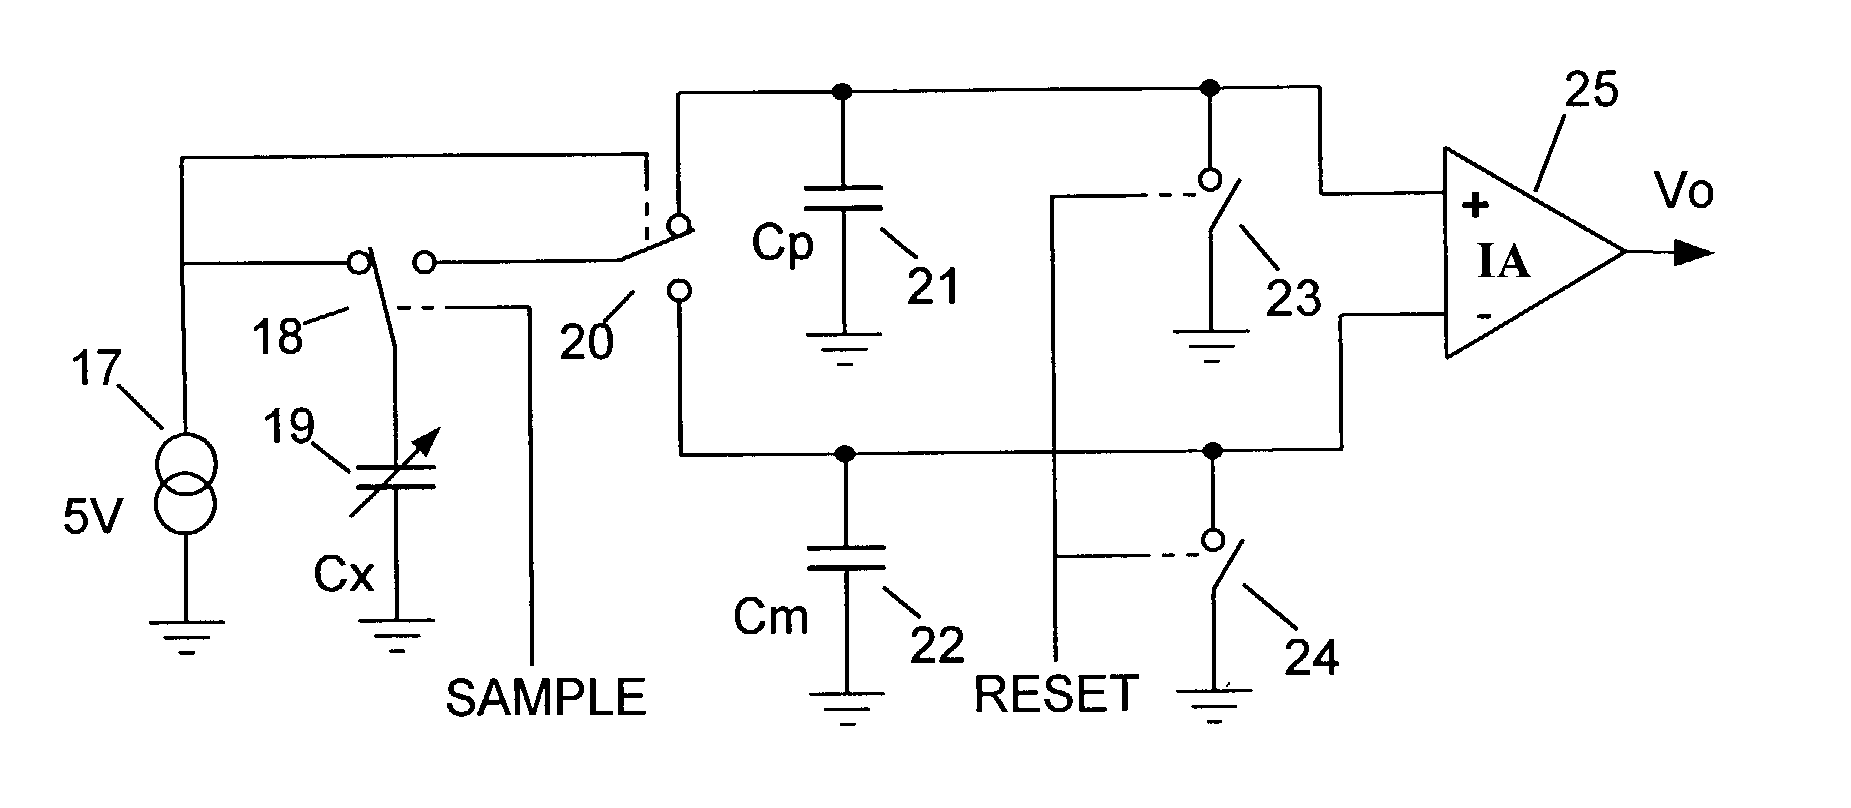 Capacitive sensor circuit with good noise rejection